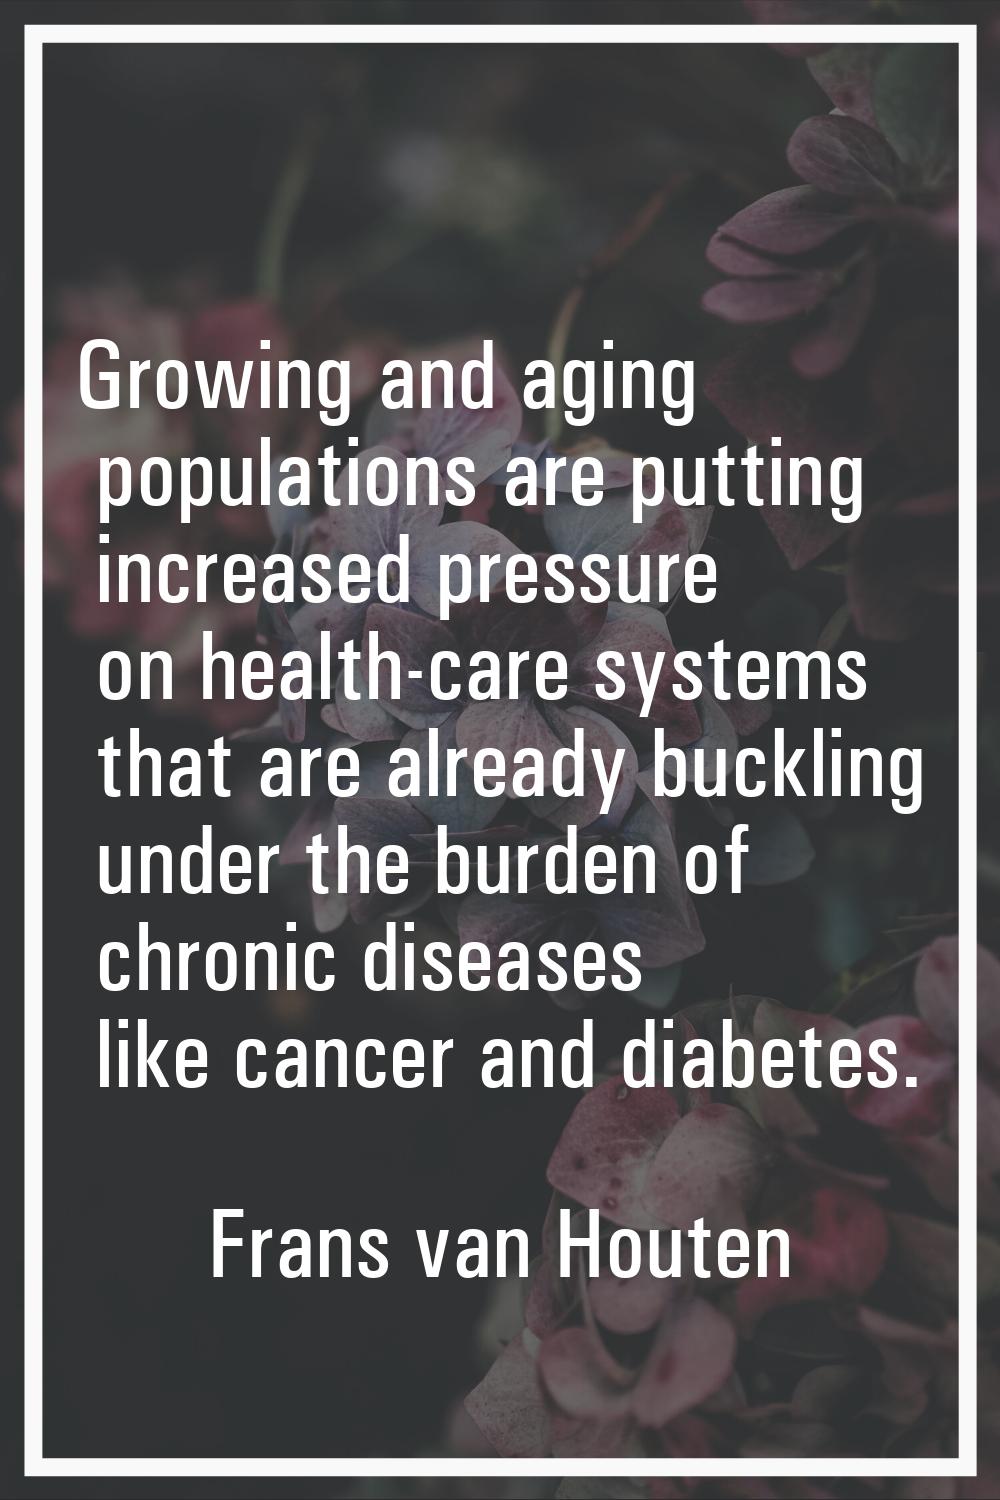 Growing and aging populations are putting increased pressure on health-care systems that are alread